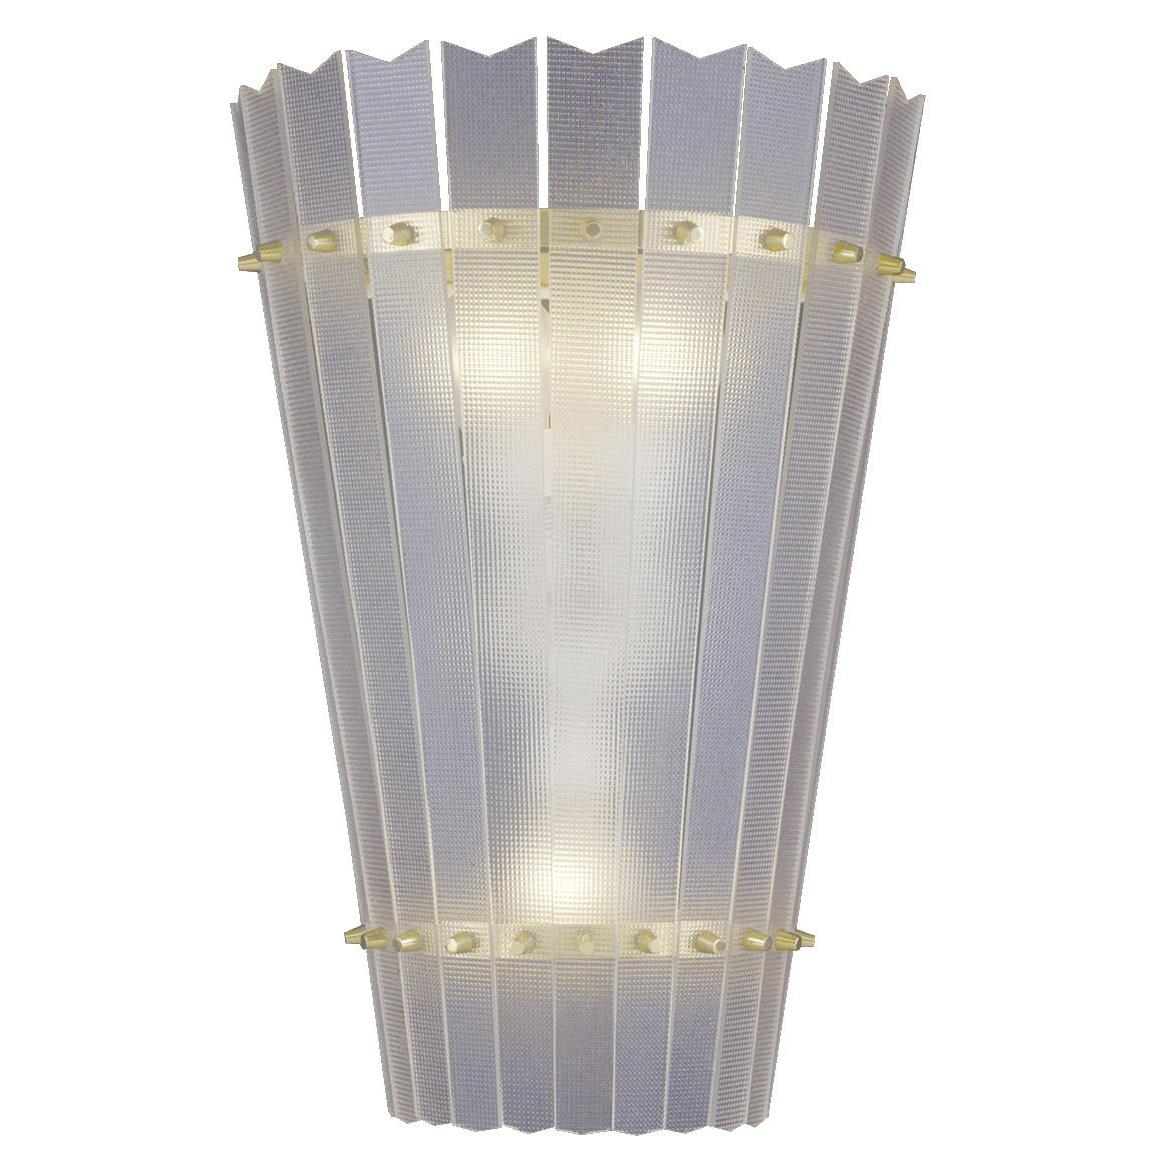 Mid-Century Modern Wall Light with Acrylic Shade "Aphrodite", Re Edition